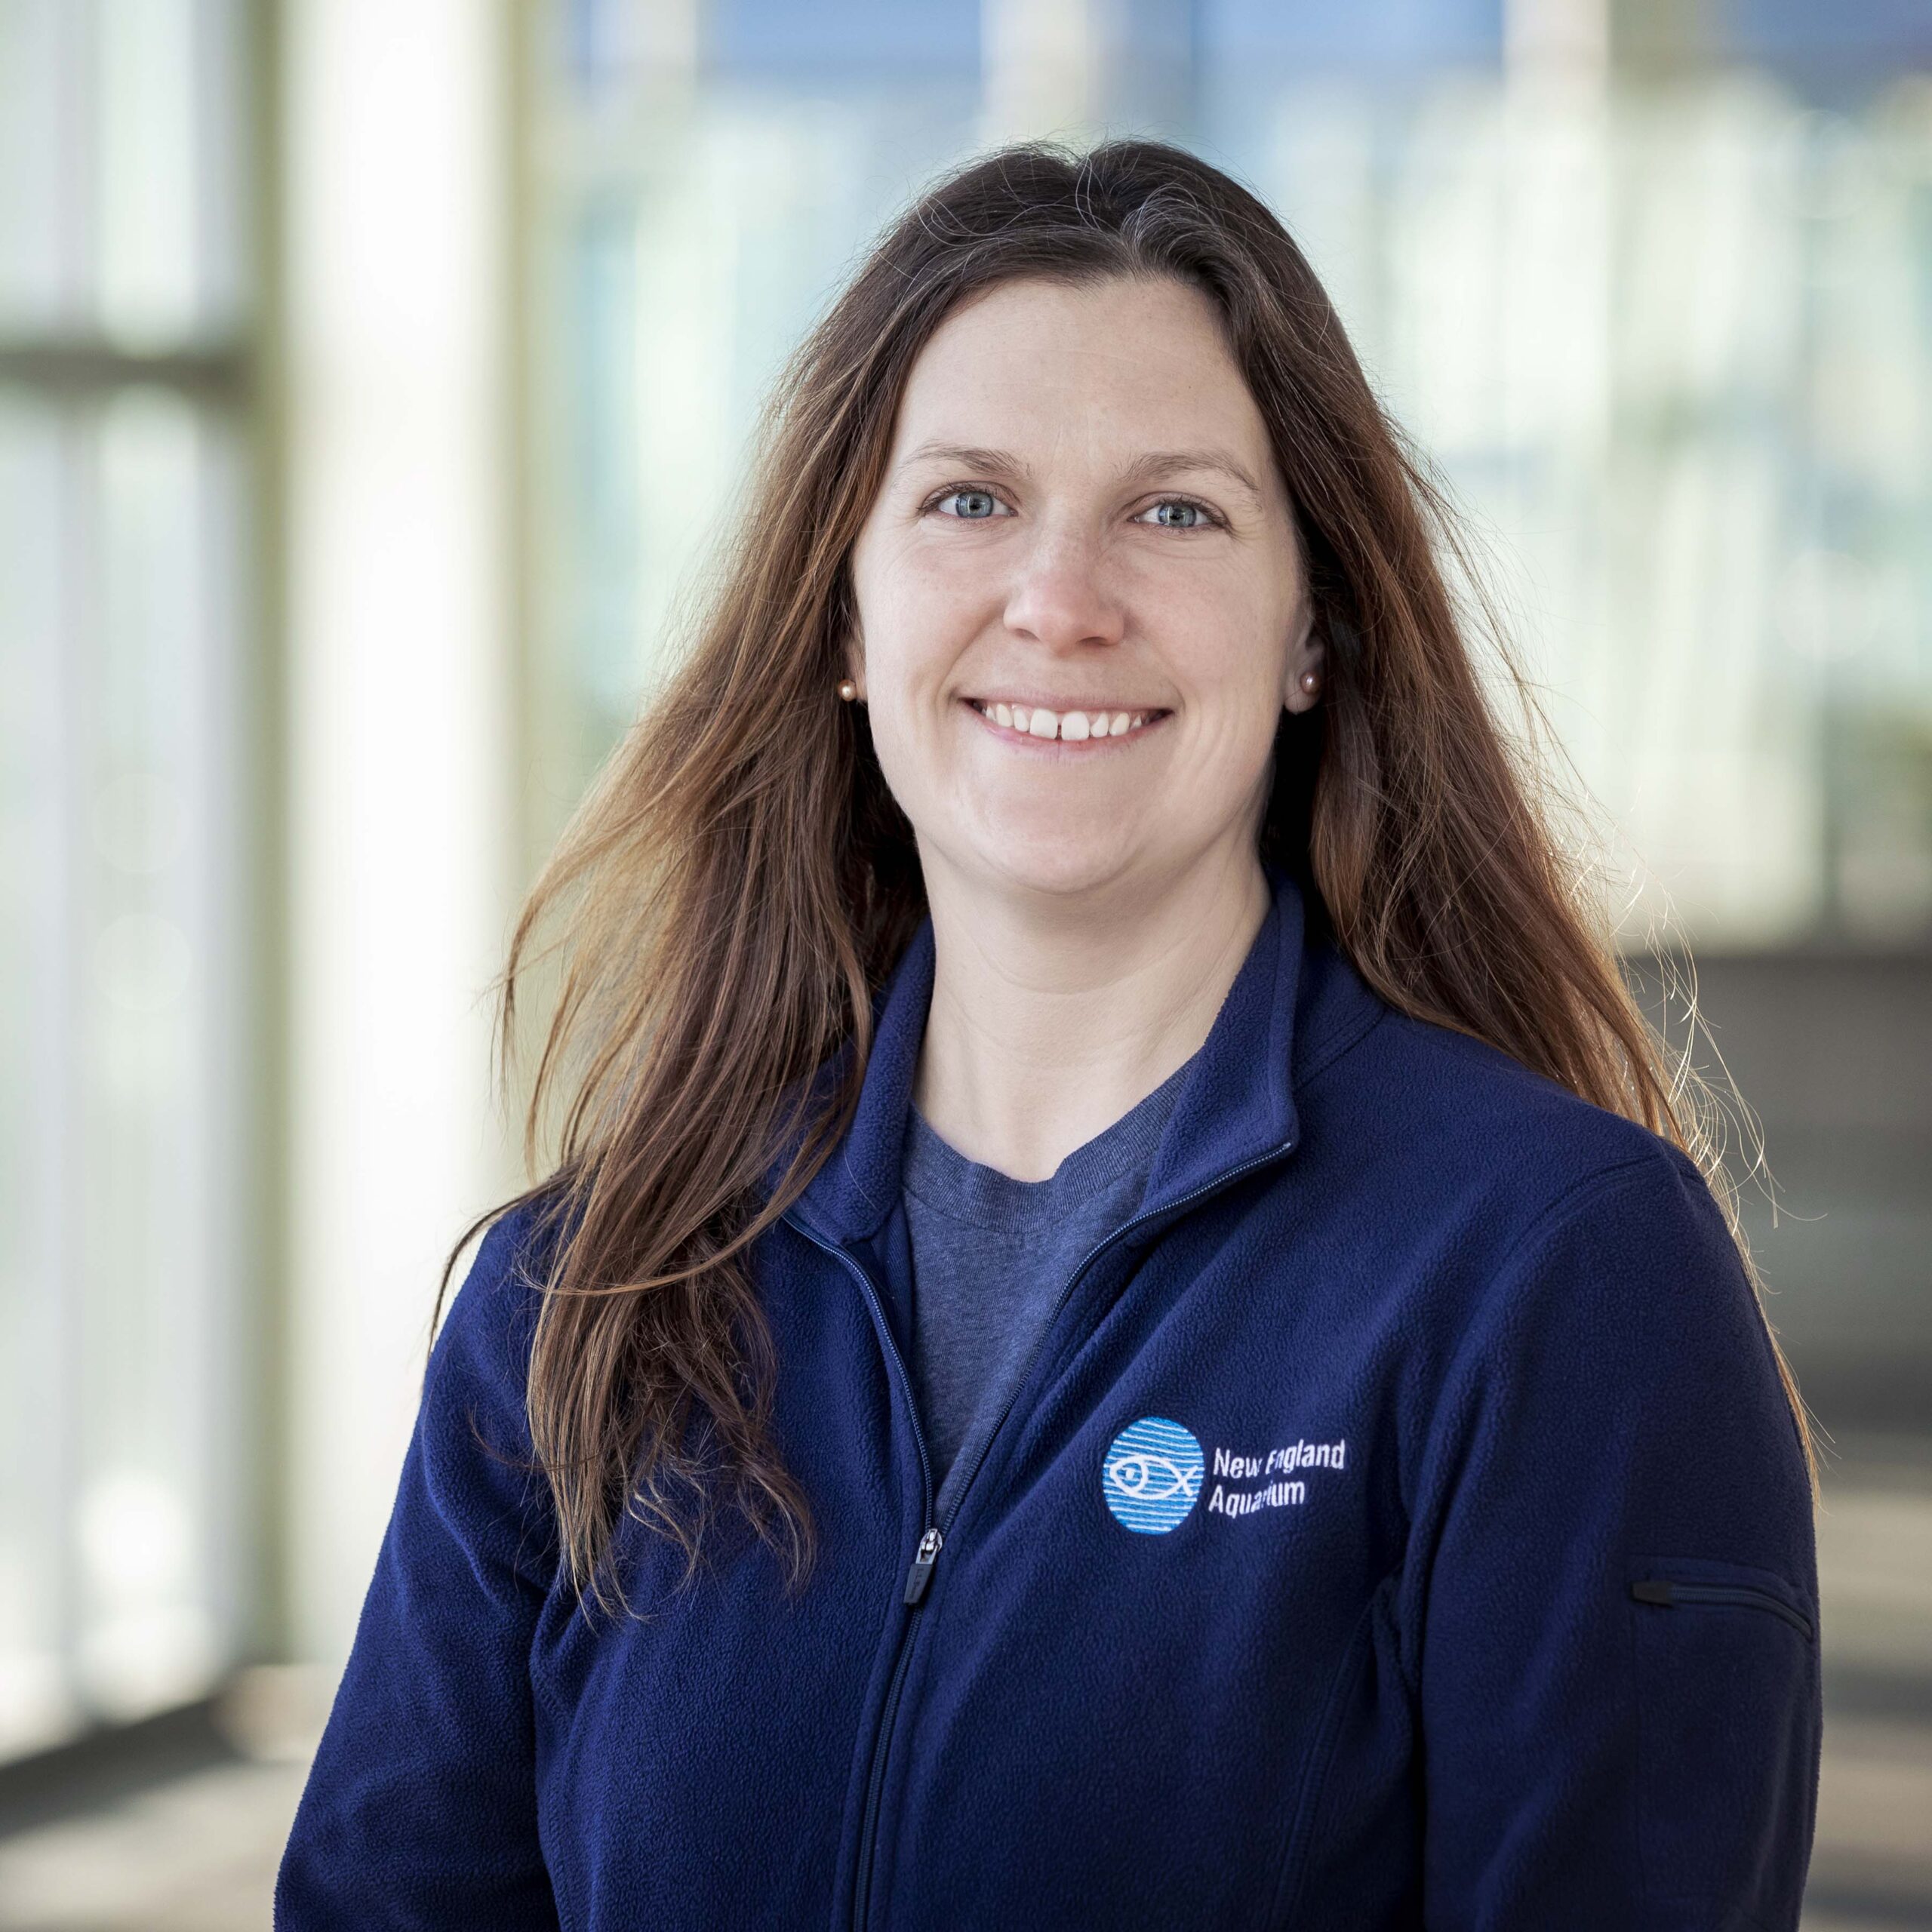 Staff member of the New England Aquarium's Marine Mammal Center. Photo by Caitlin Cunningham Photography.